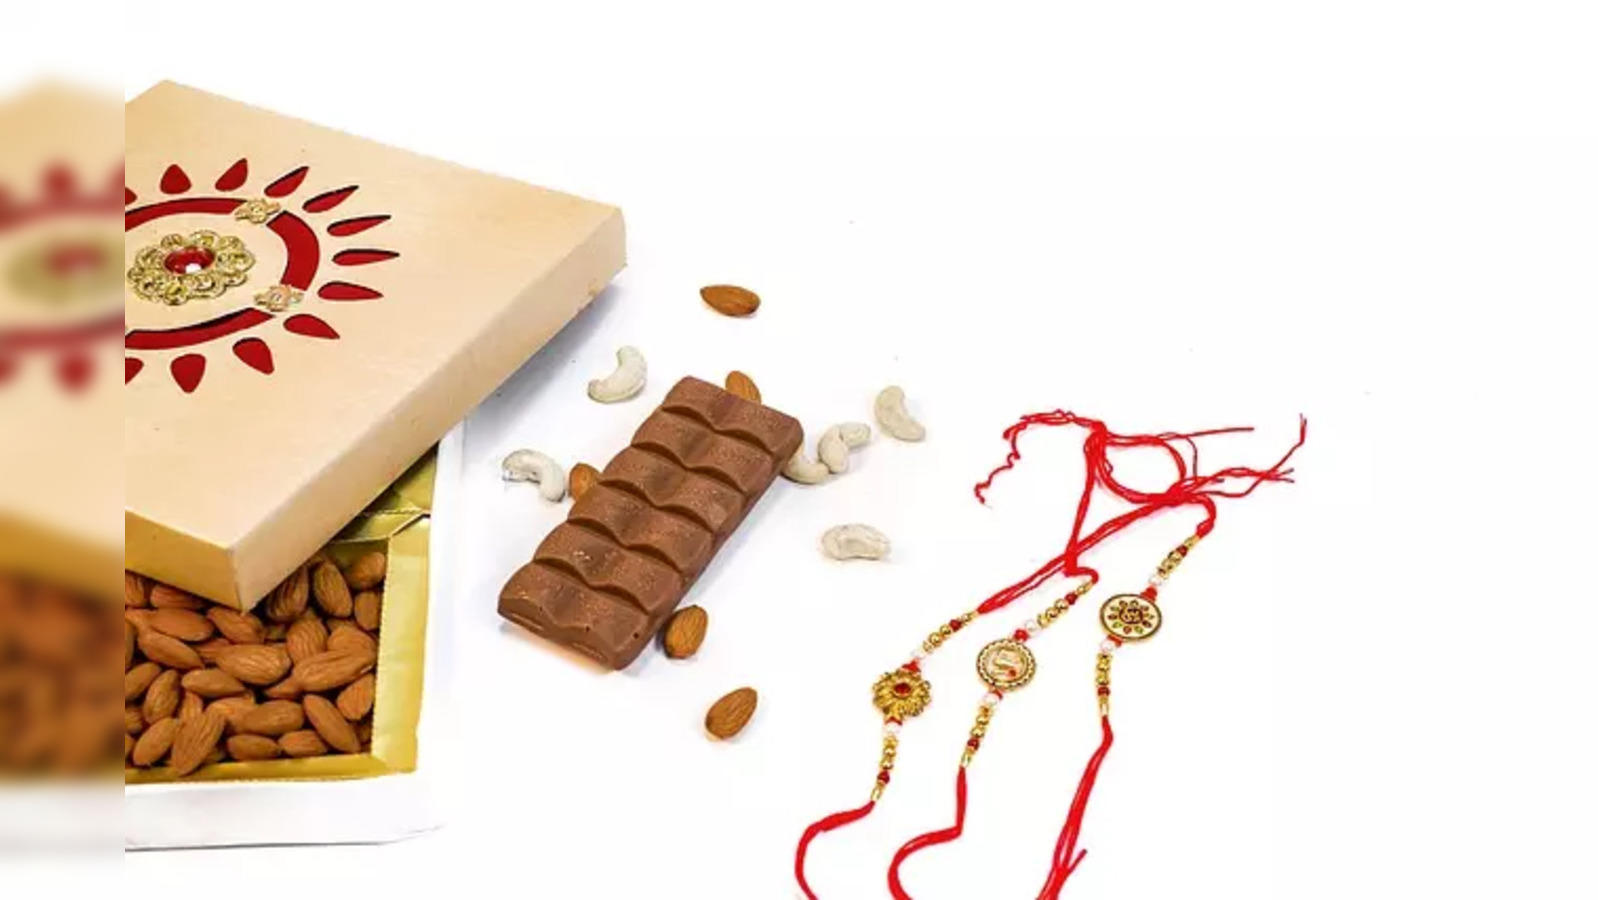 15 Best Raksha Bandhan Gifts Ideas 2021: Rakhi Gifts for Sisters and  Brothers you can buy Online and Offline